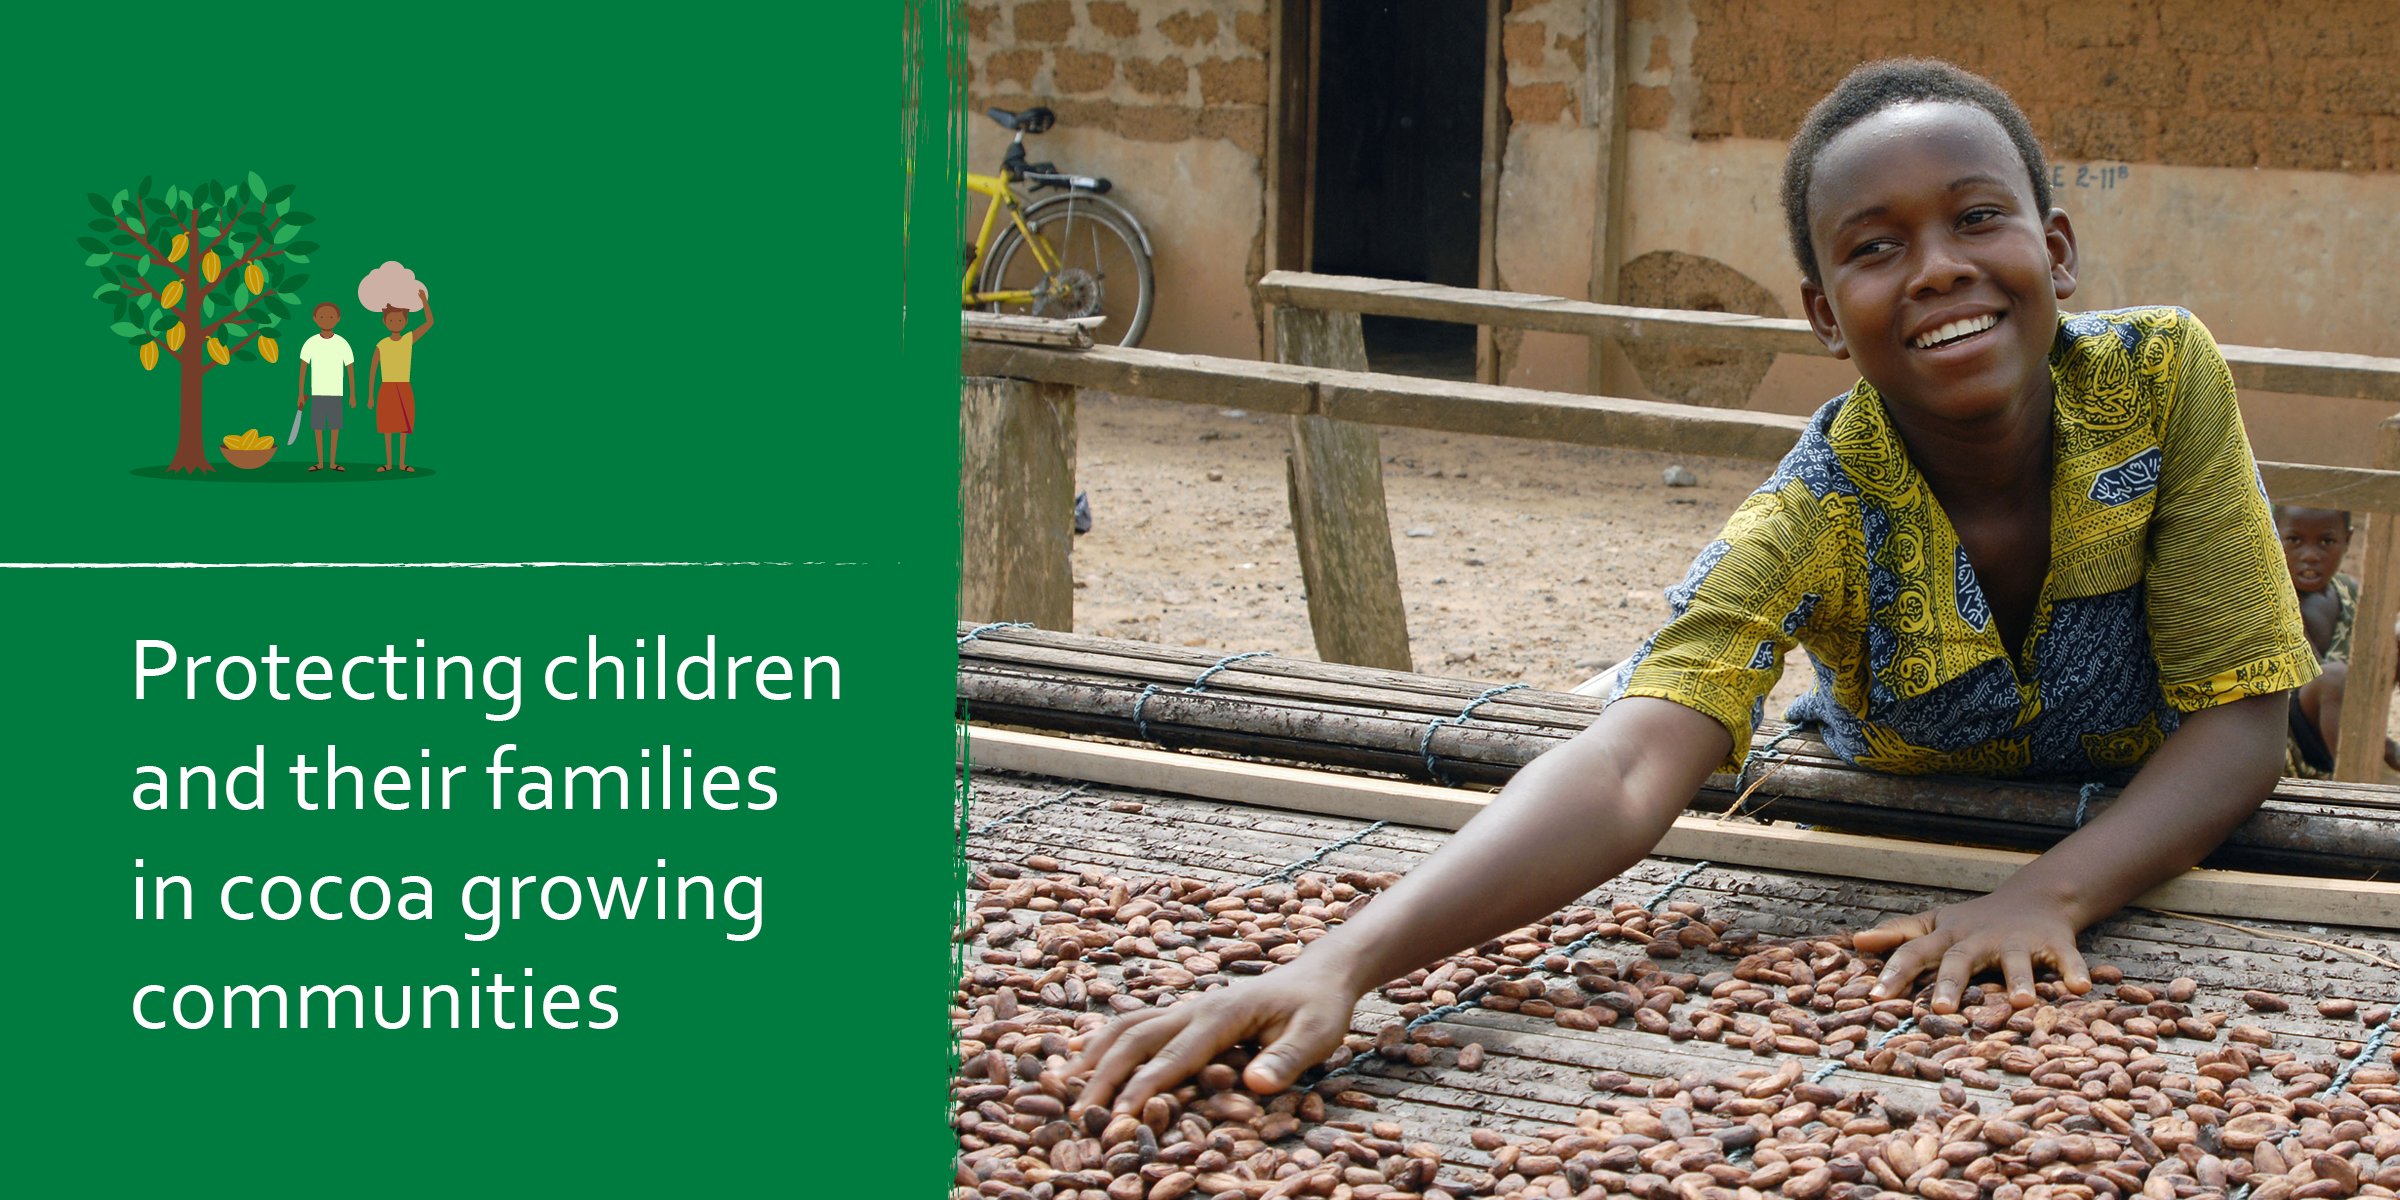 Protecting children and their families in cocoa growing communities